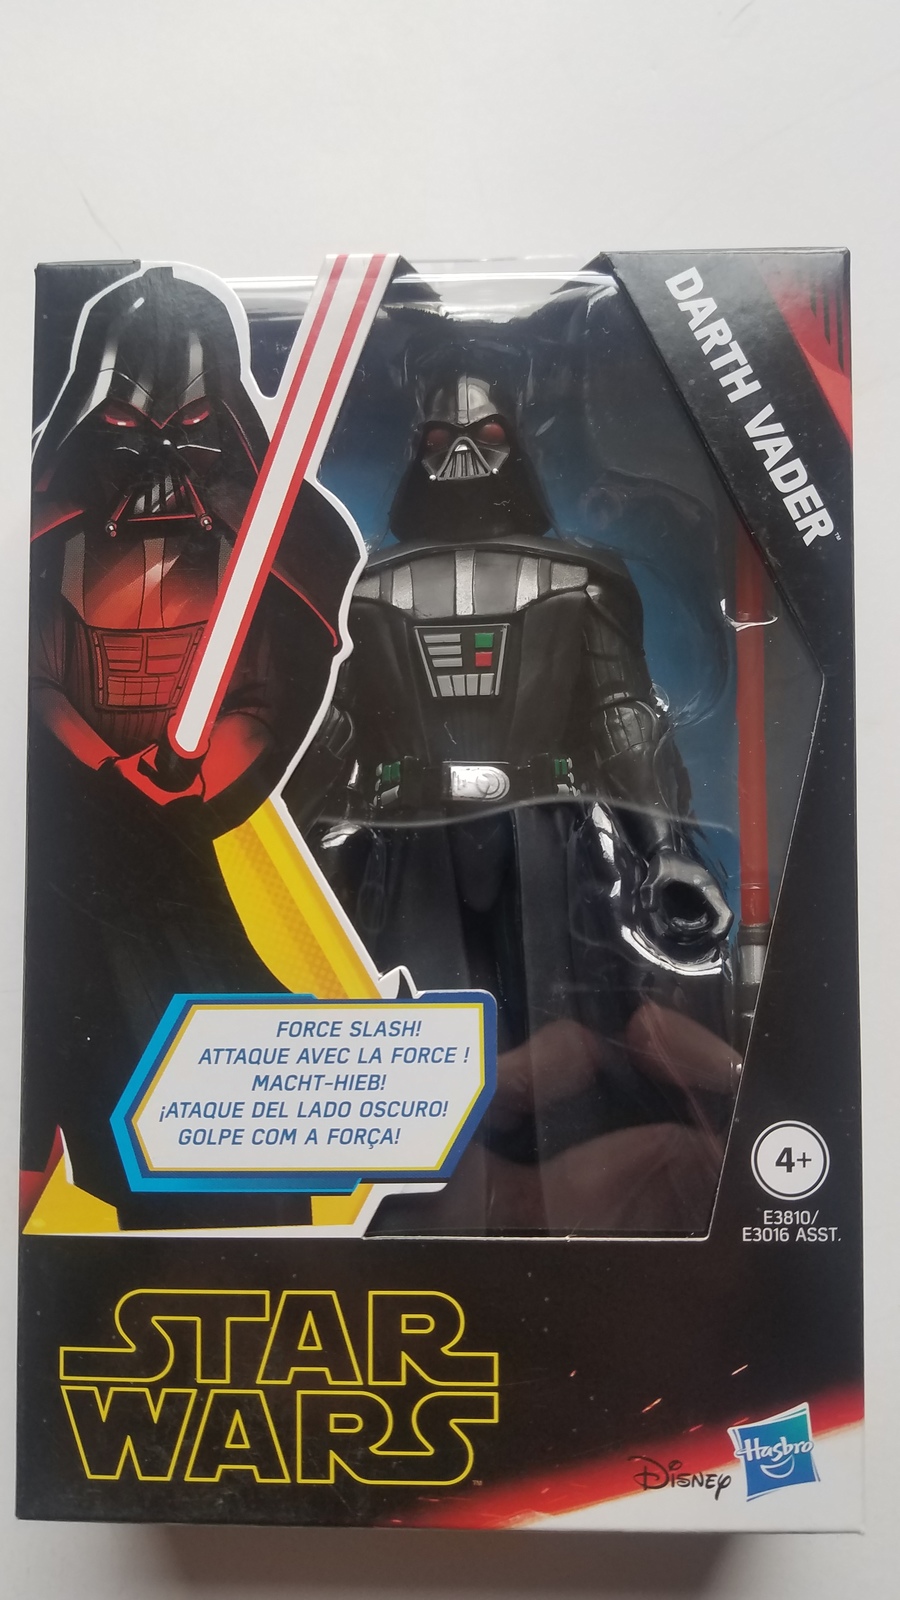 Primary image for Hasbro Star Wars  Galaxy of Adventures   Darth Vader Action Figure New